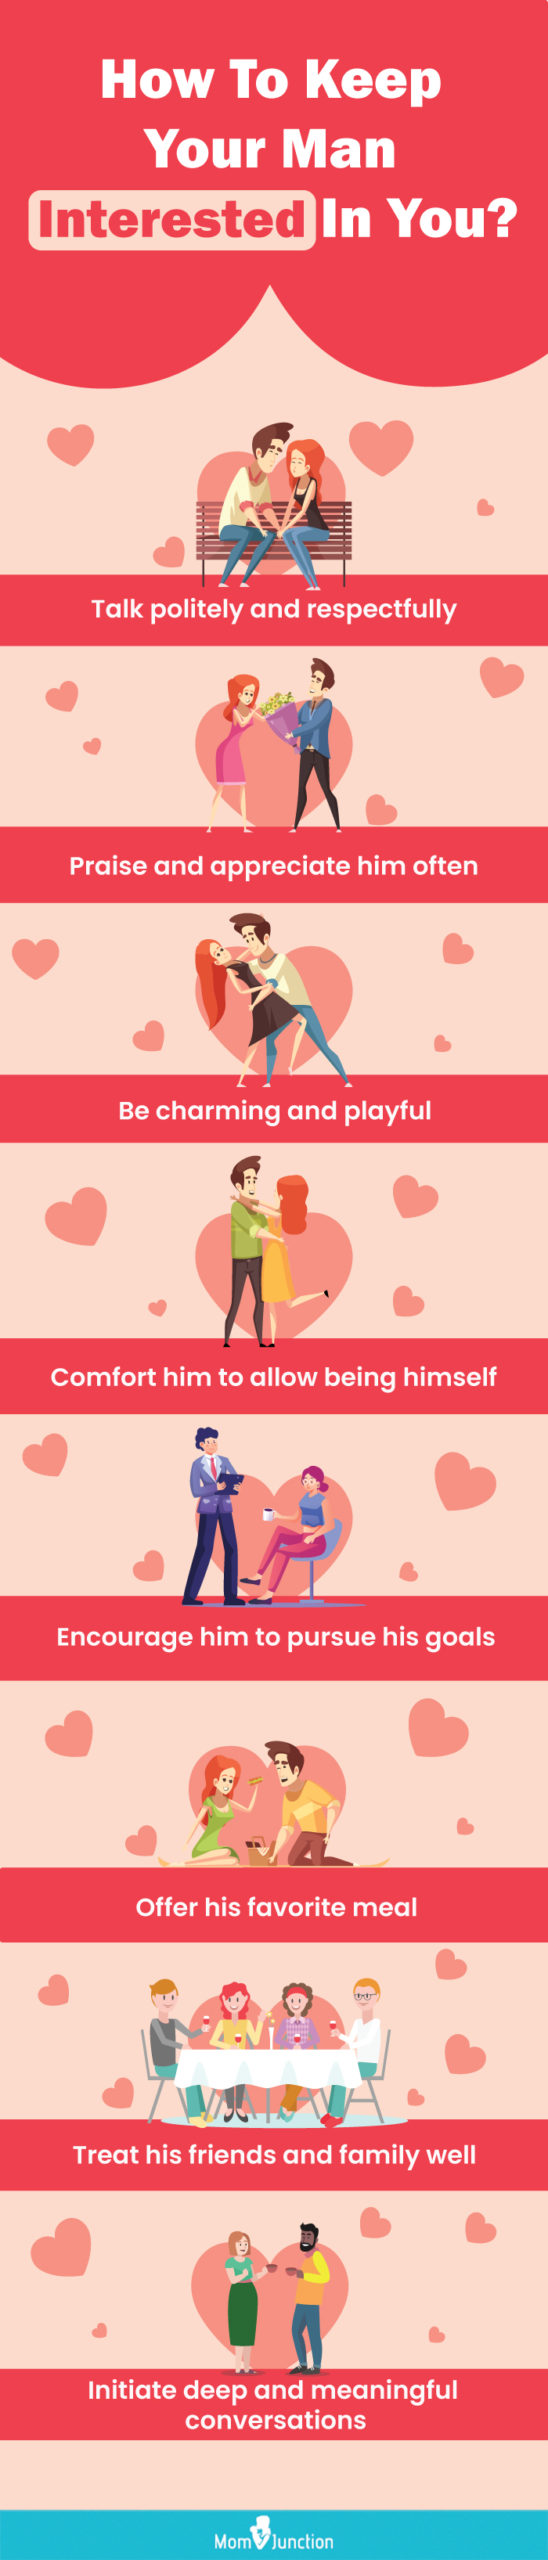 how can you keep your man interested in you (infographic)